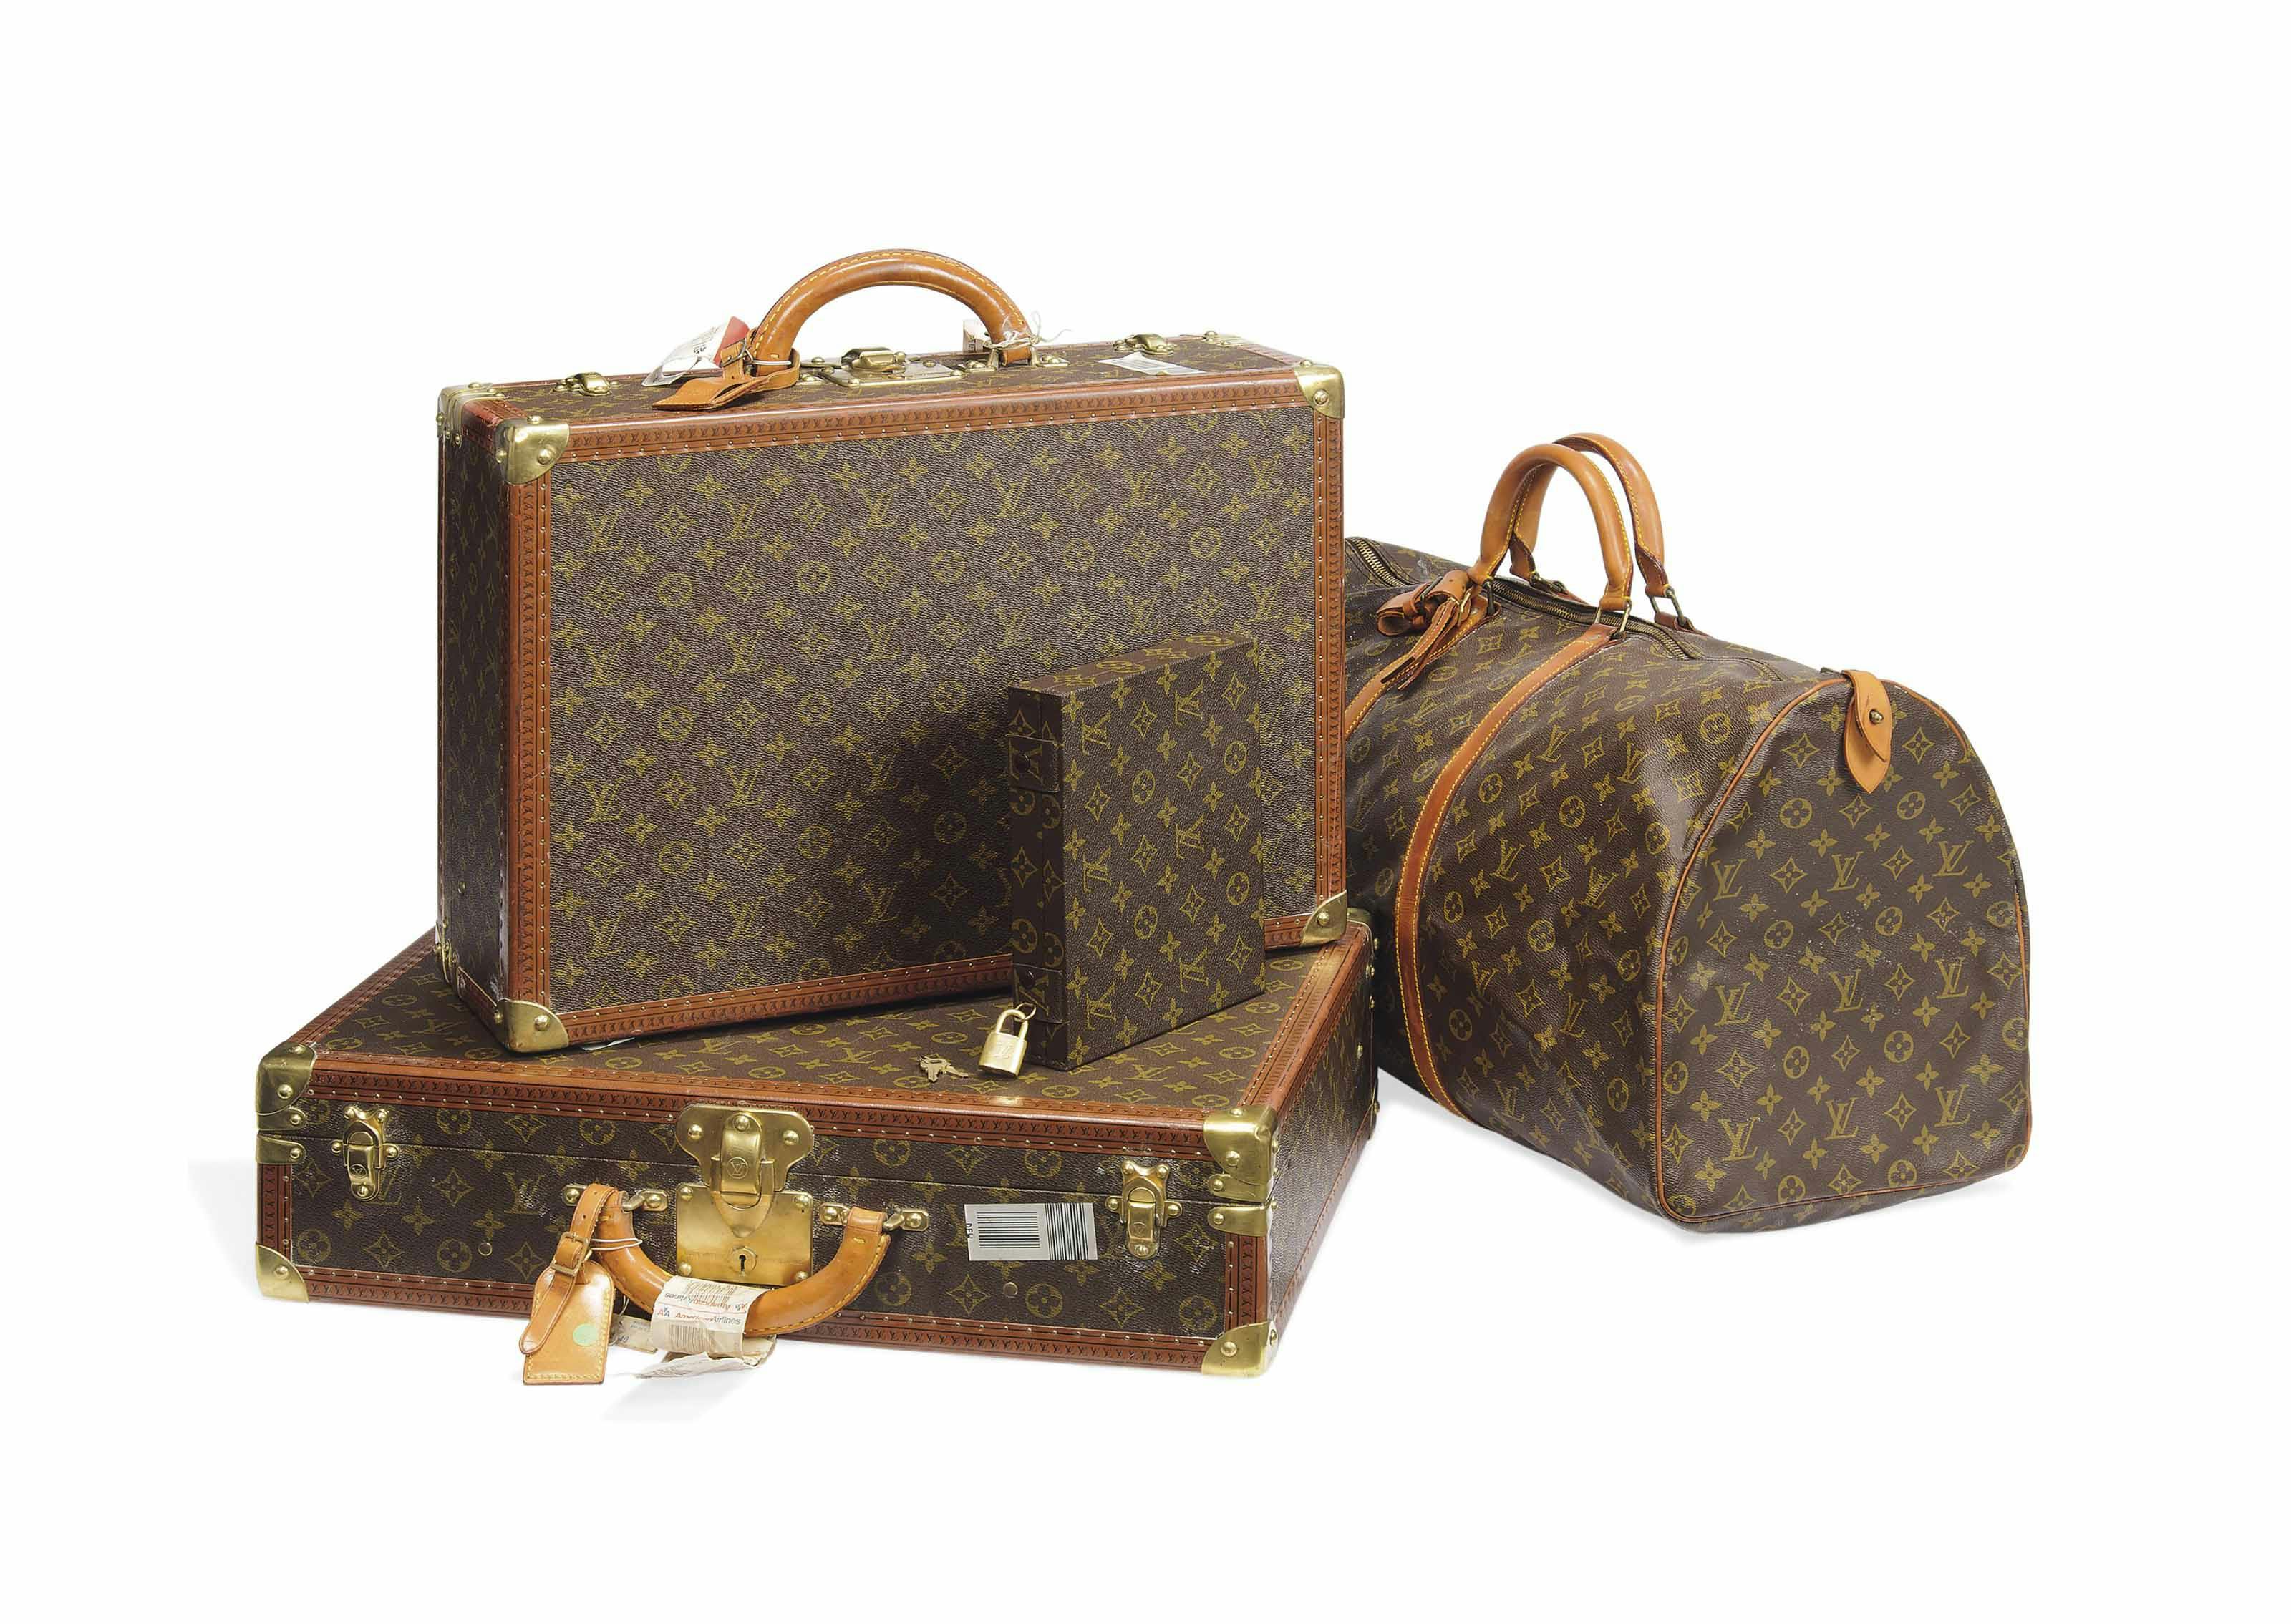 Sold at Auction: LOUIS VUITTON - TRUNK SILK SCARF - MONOGRAM LV LUGGAGE  PRINT